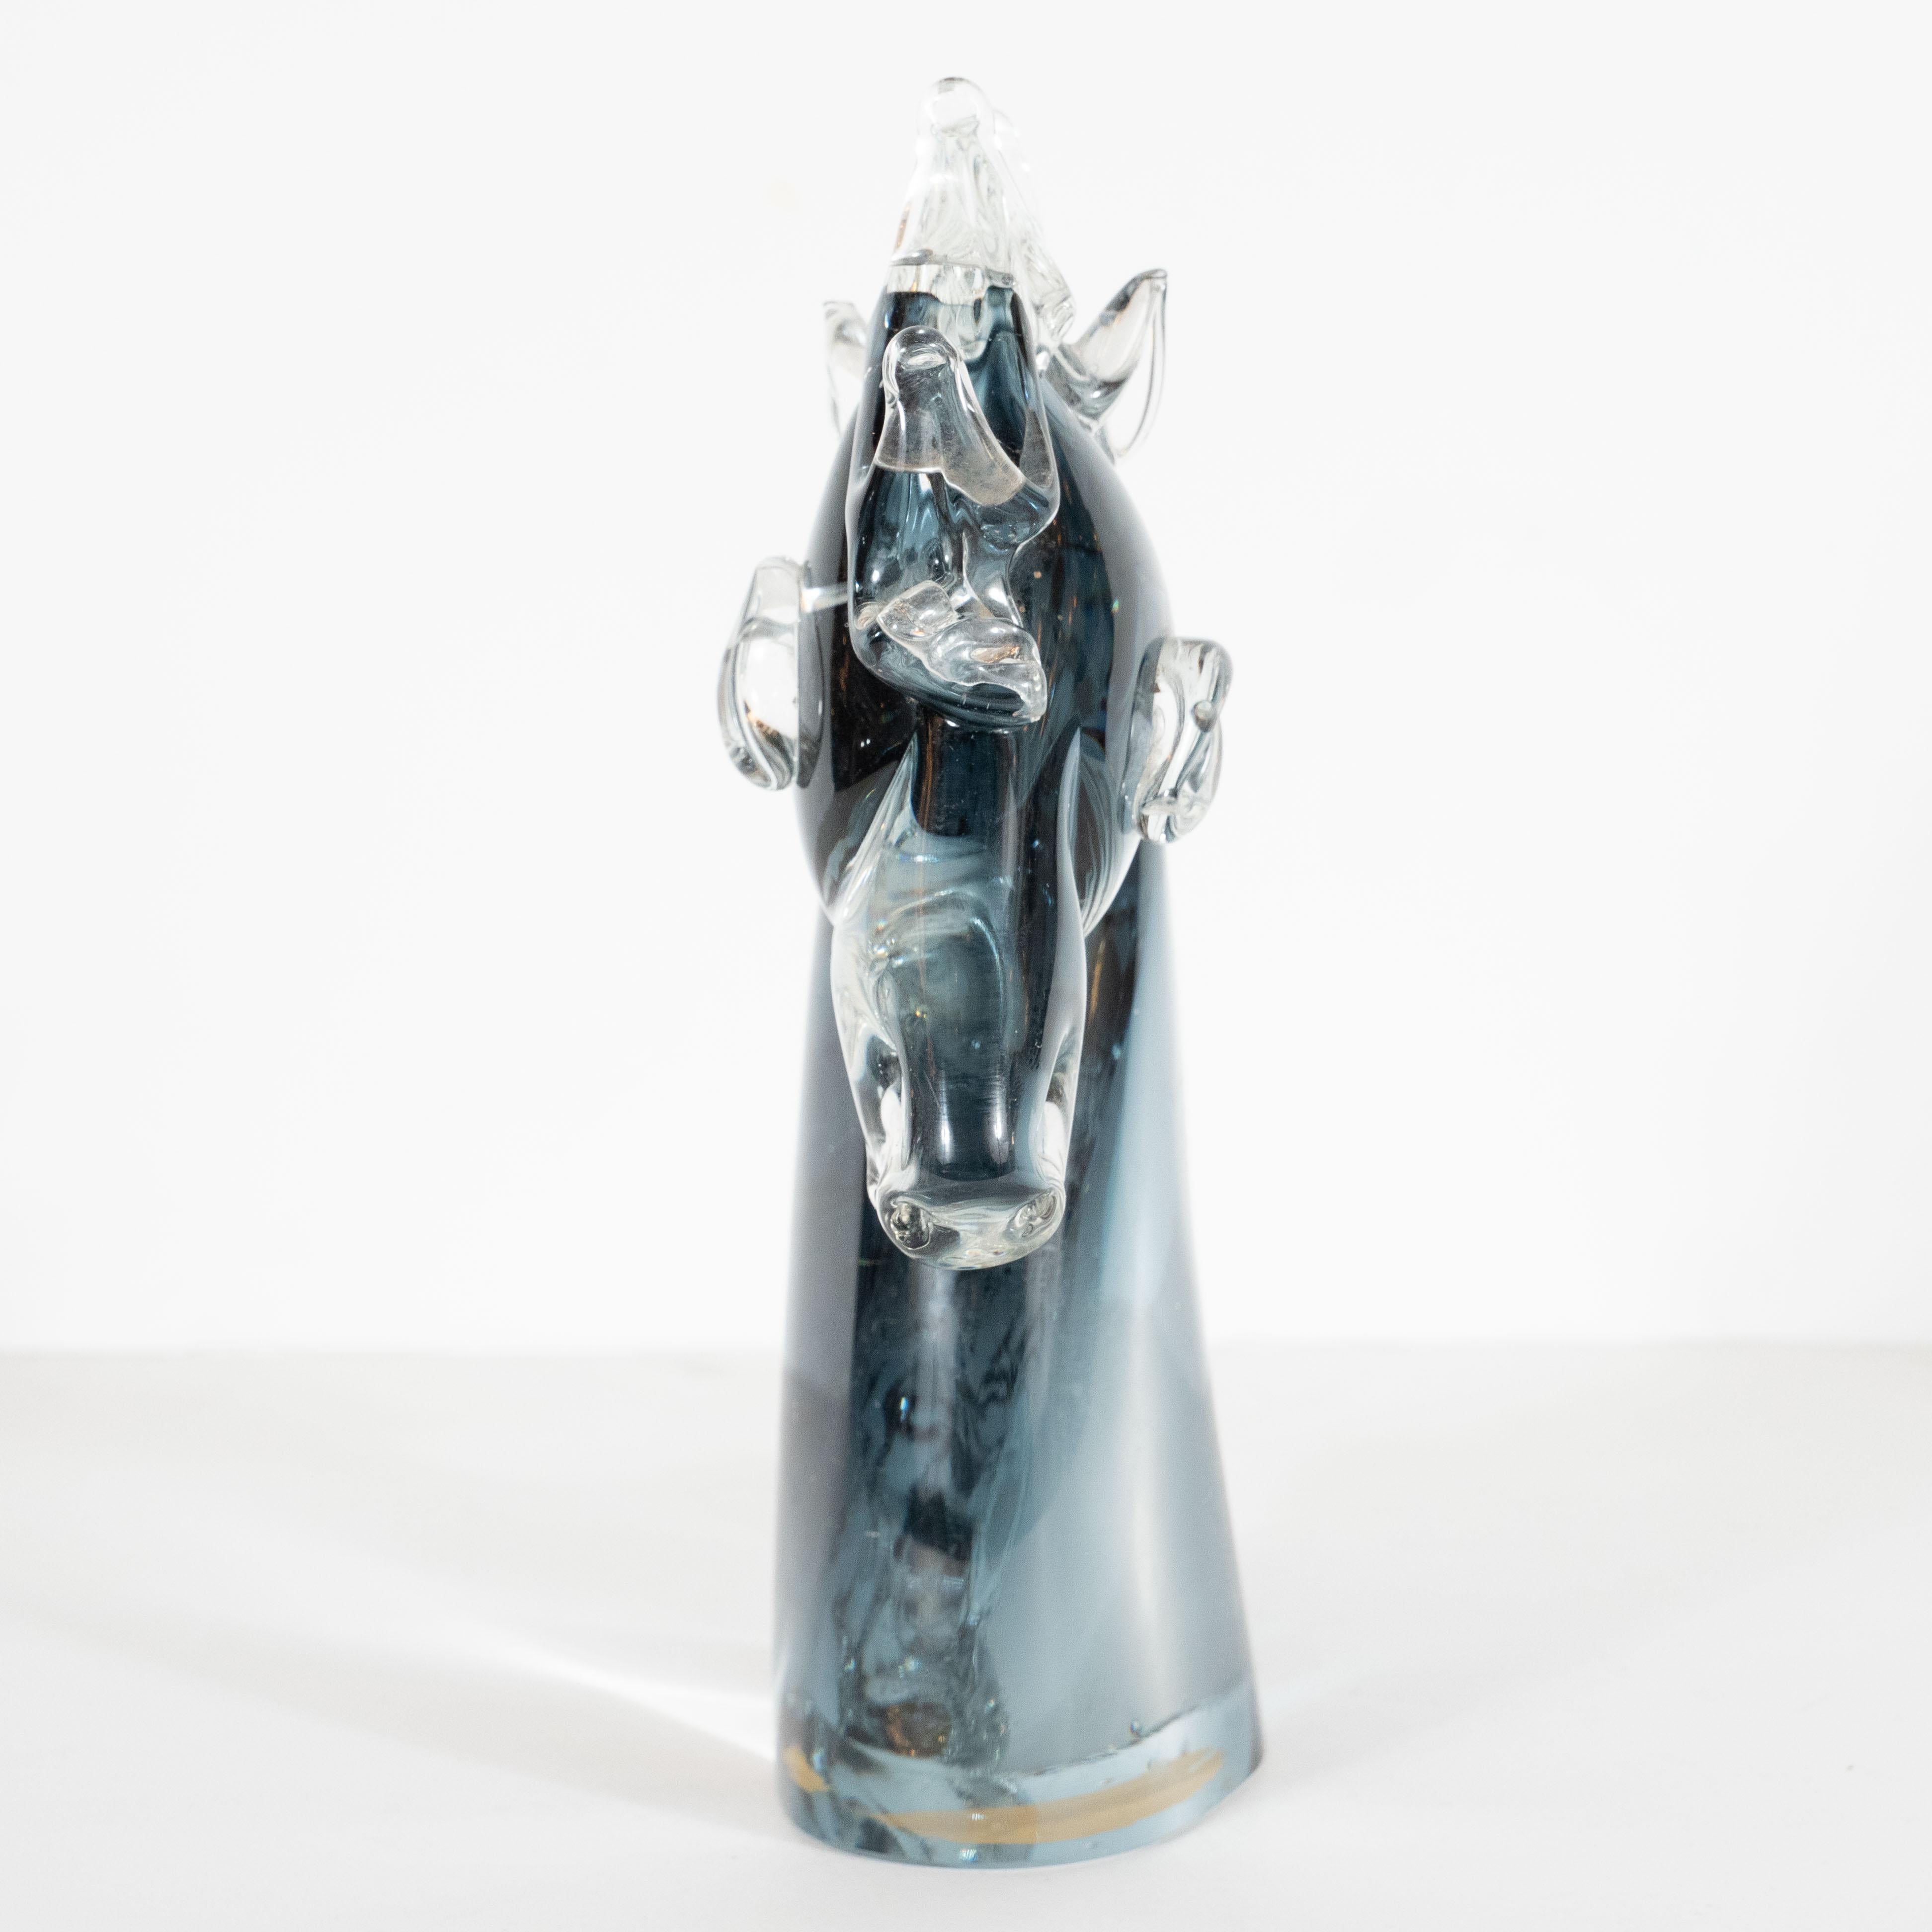 This graphic and refined Mid-Century Modern decorative object was hand blown in Milan, Italy circa 1960. It features a stylized stallion's head with ovoid eyes, articulated features and a highly sculptural main consisting of nine peaked forms all